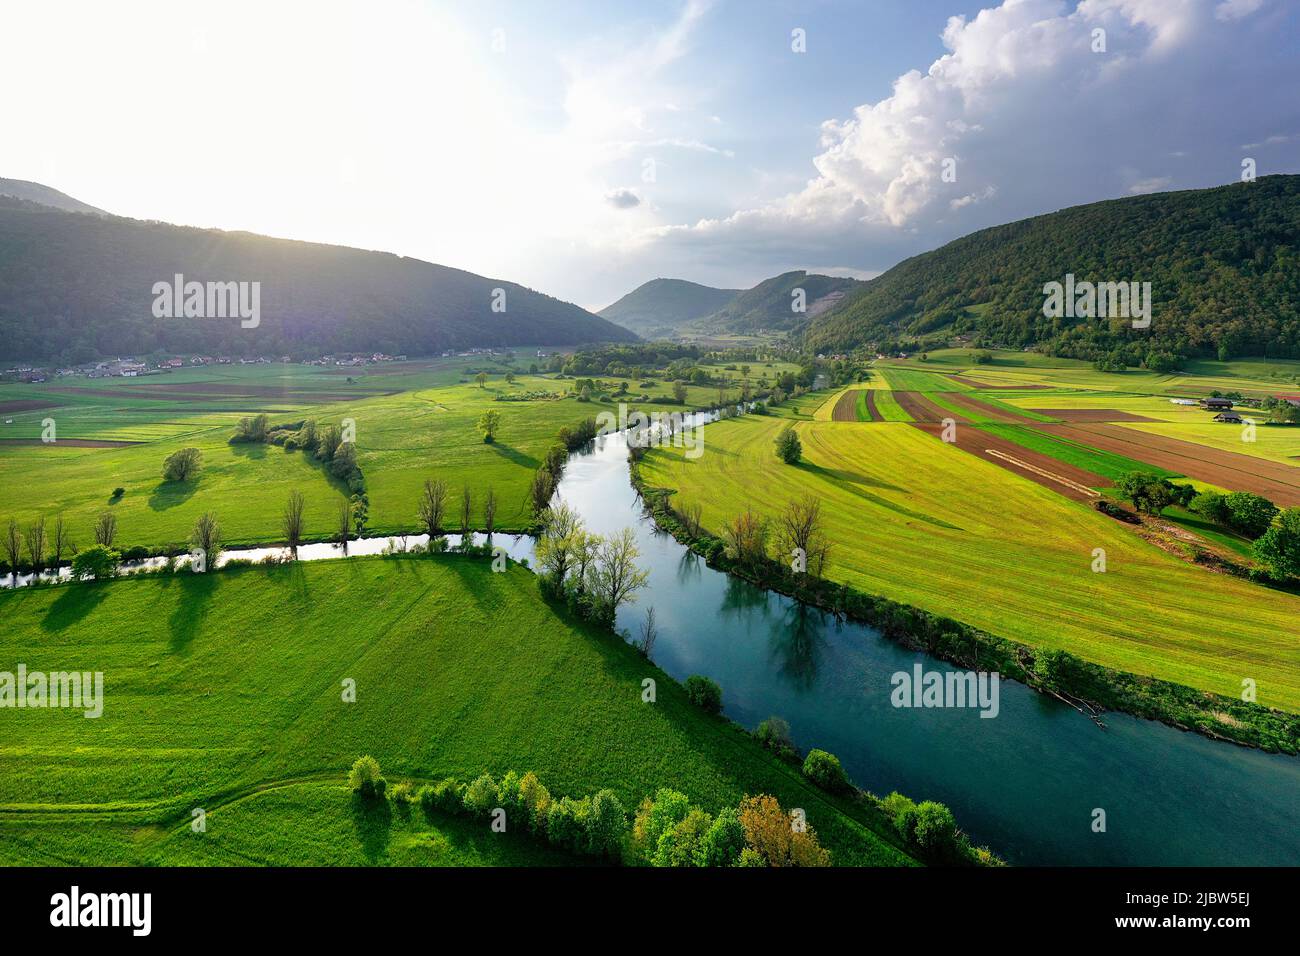 Aerial view of a beautiful Krka river at the end of a beautiful summer day near Dolenjske toplice, Slovenia Stock Photo